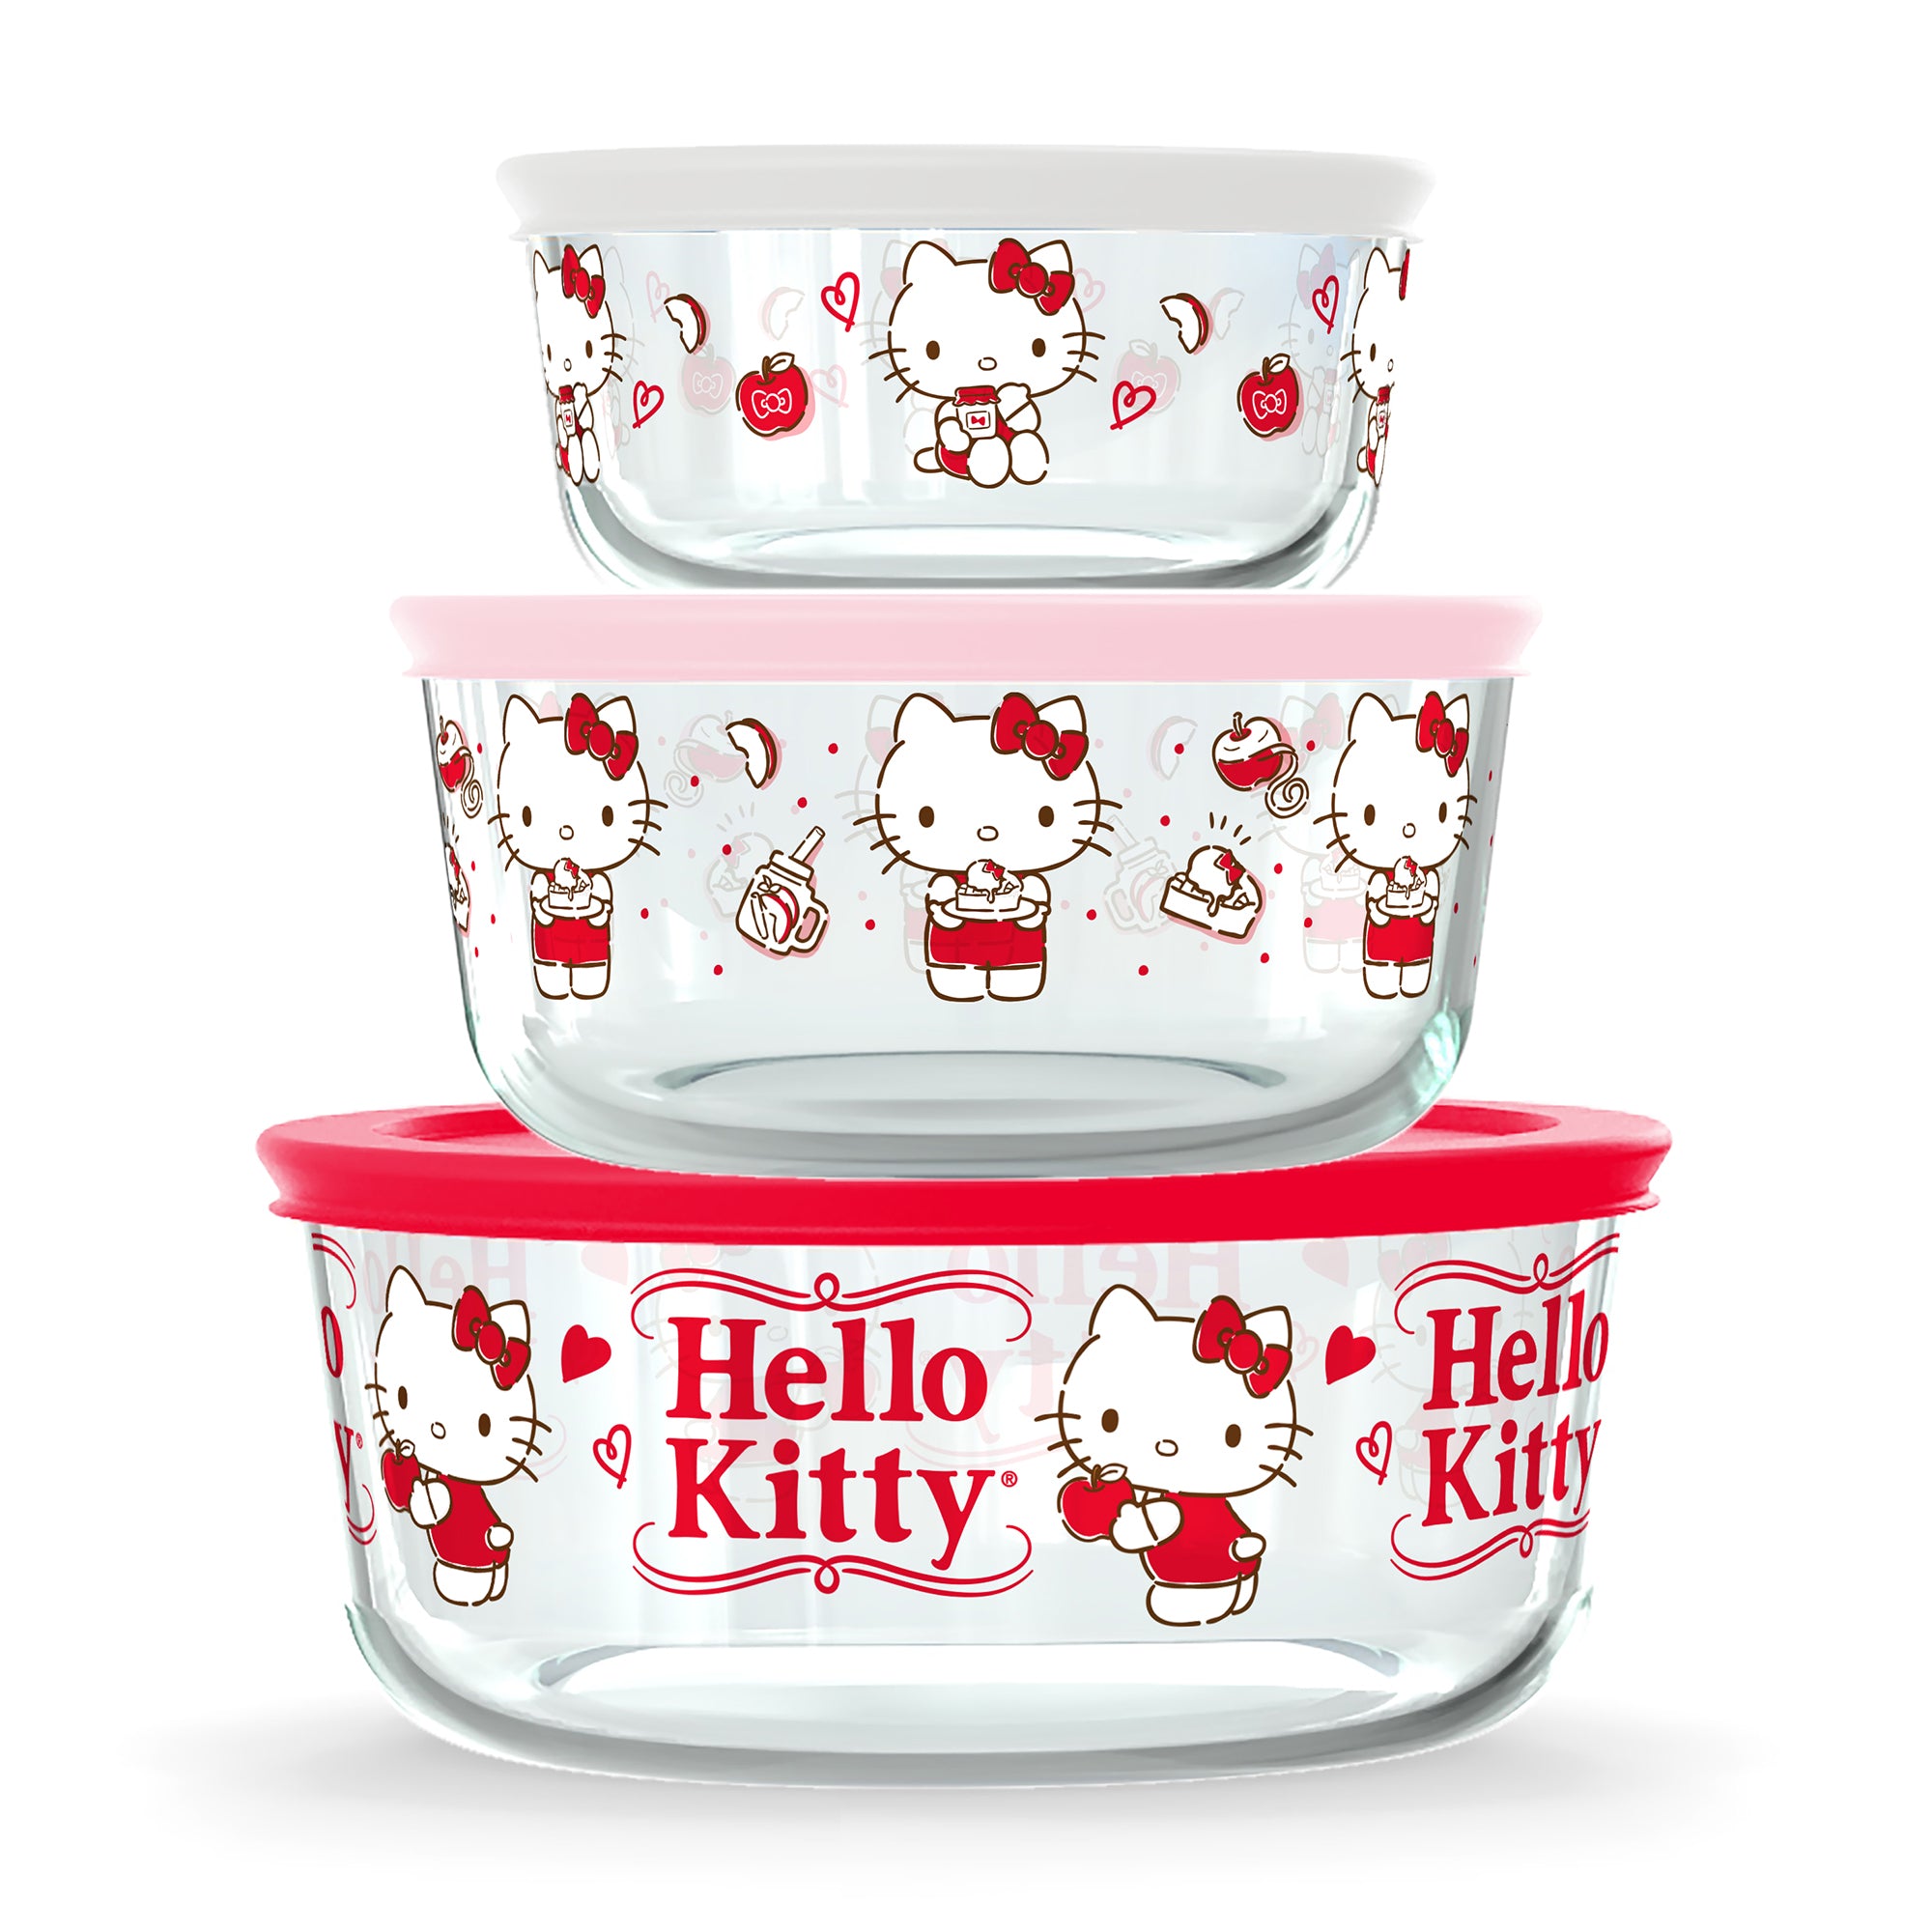 Pyrex 3-cup Rectangle Glass Storage: Hello Kitty, Star Wars, Nightmare  Before Christmas With Lid 